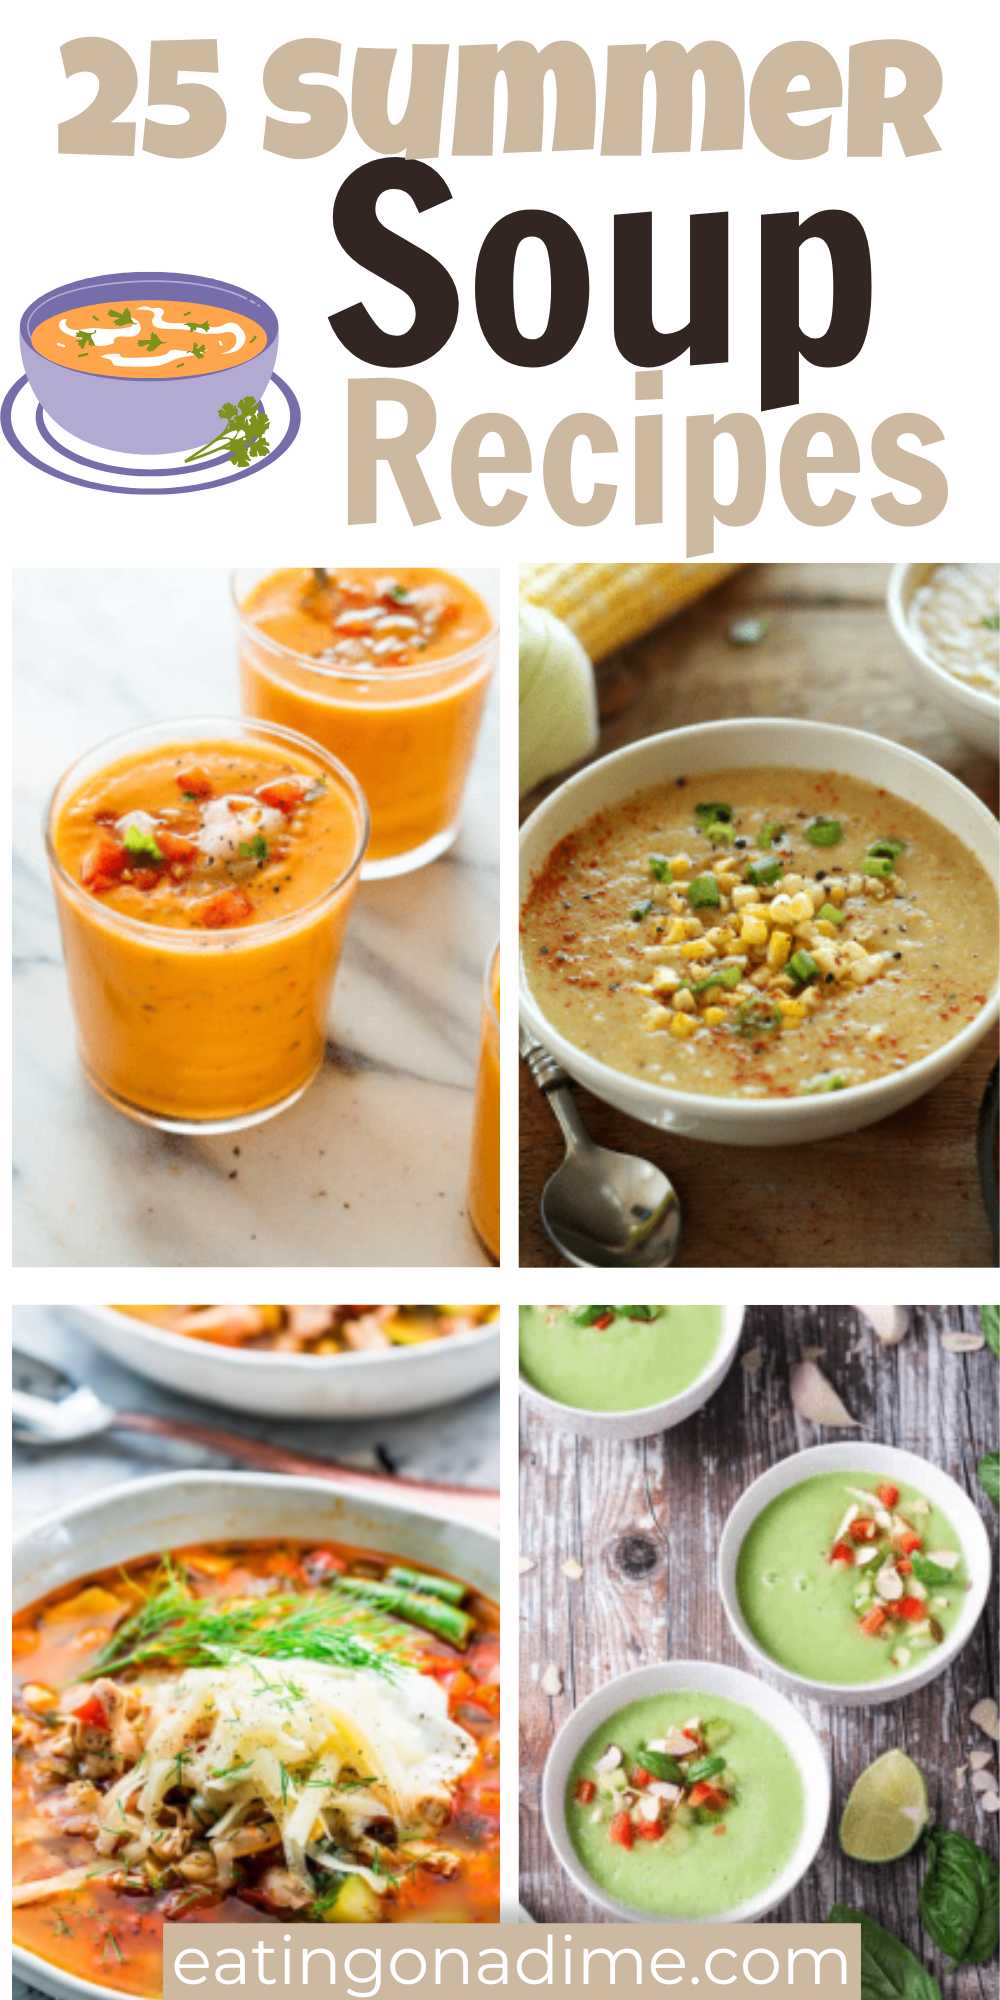 Summer doesn't mean you cannot enjoy yummy and easy soups. That's why we are sharing 25 summer soup recipes that are lighter than soups served at other times. Choose from the best soups that are easy to make in the slow cooker or stove top. #eatingonadime #summersouprecipes